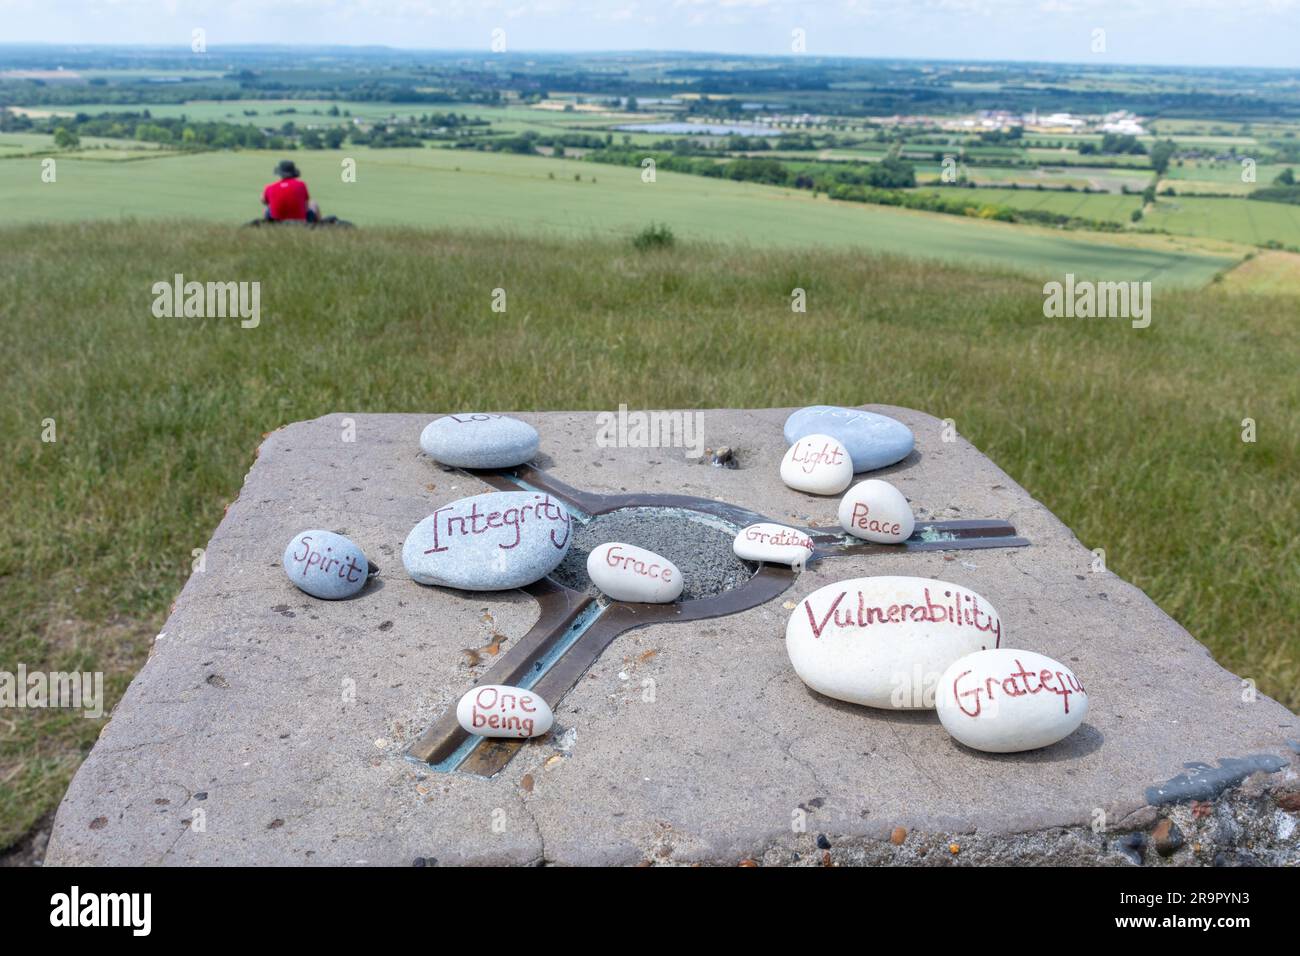 The summit of Ivinghoe Beacon in the Chilterns Area of Outstanding Natural Beauty, Buckinghamshire, England, UK, with painted stones on the trig point Stock Photo